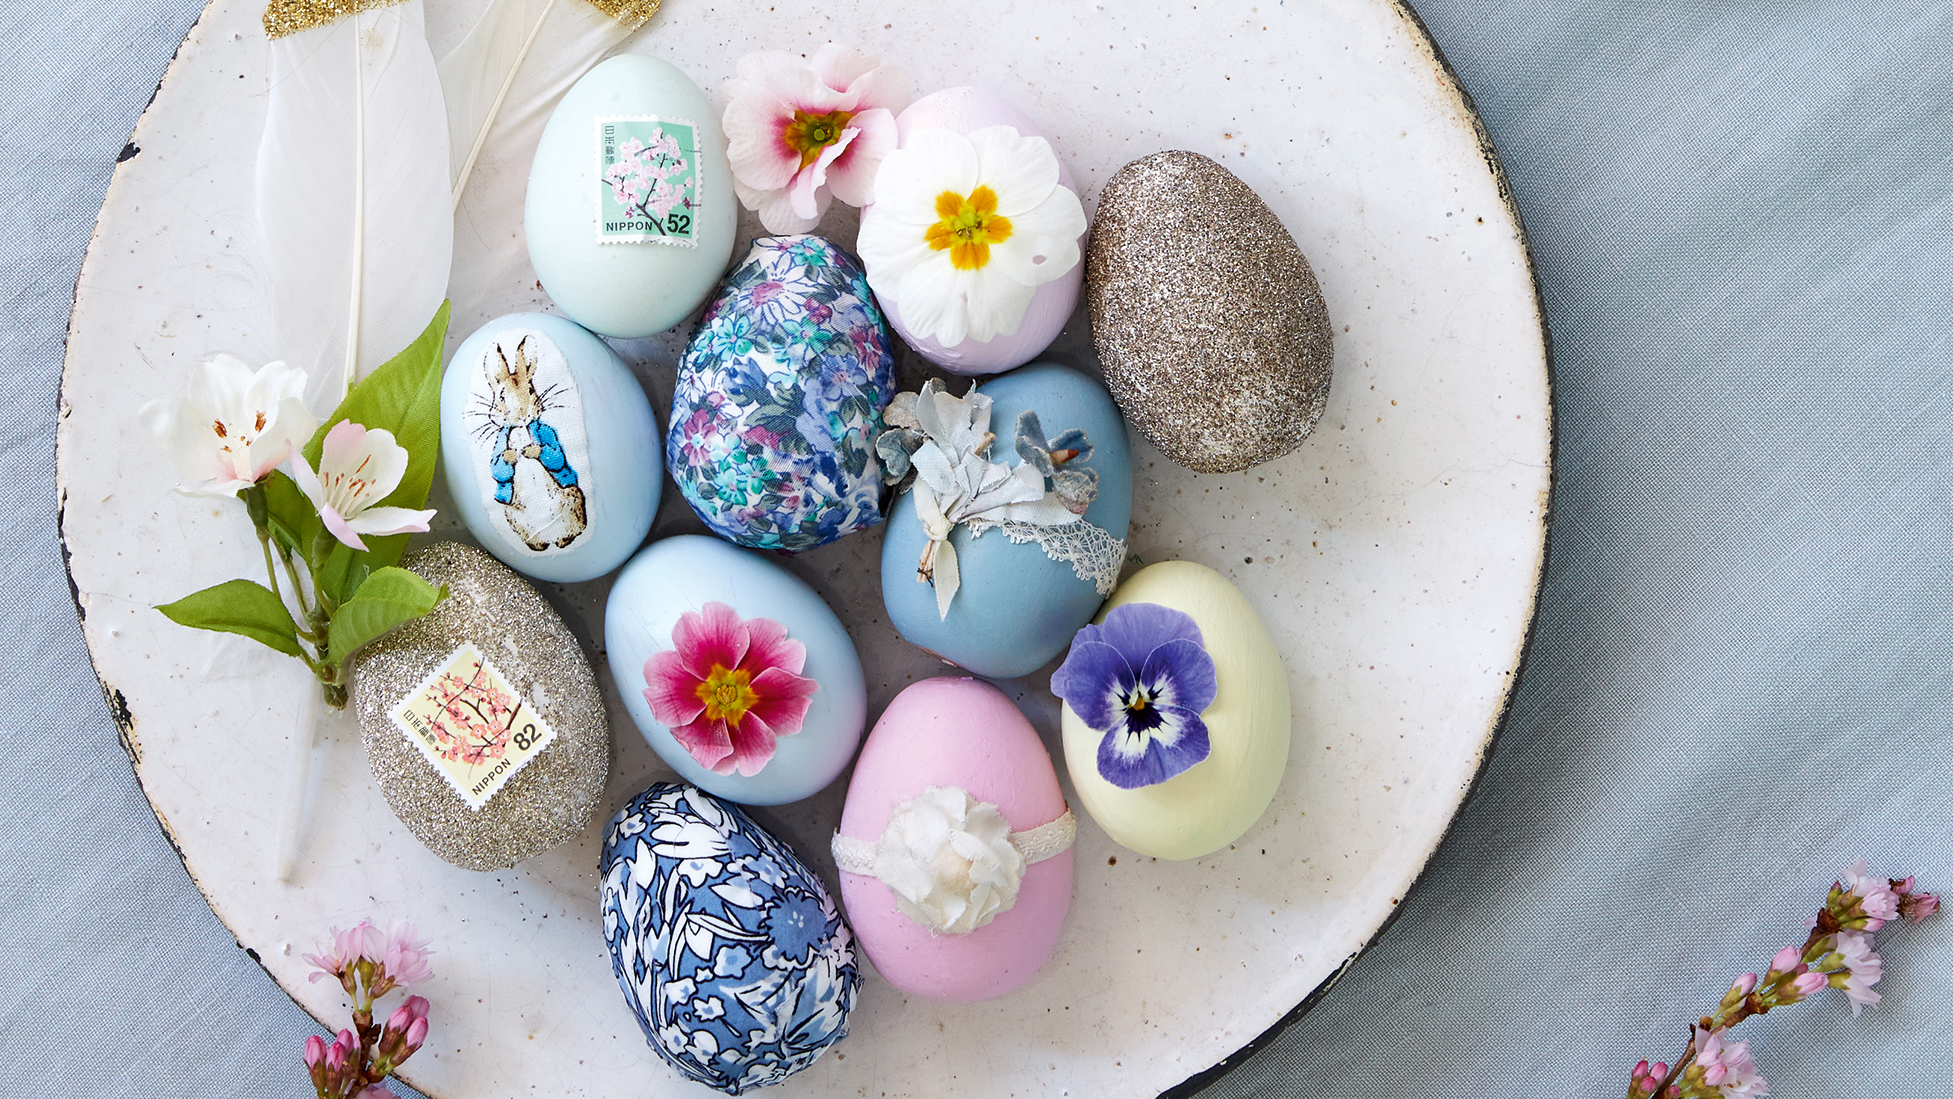 How to decorate Easter eggs: for a pretty seasonal display